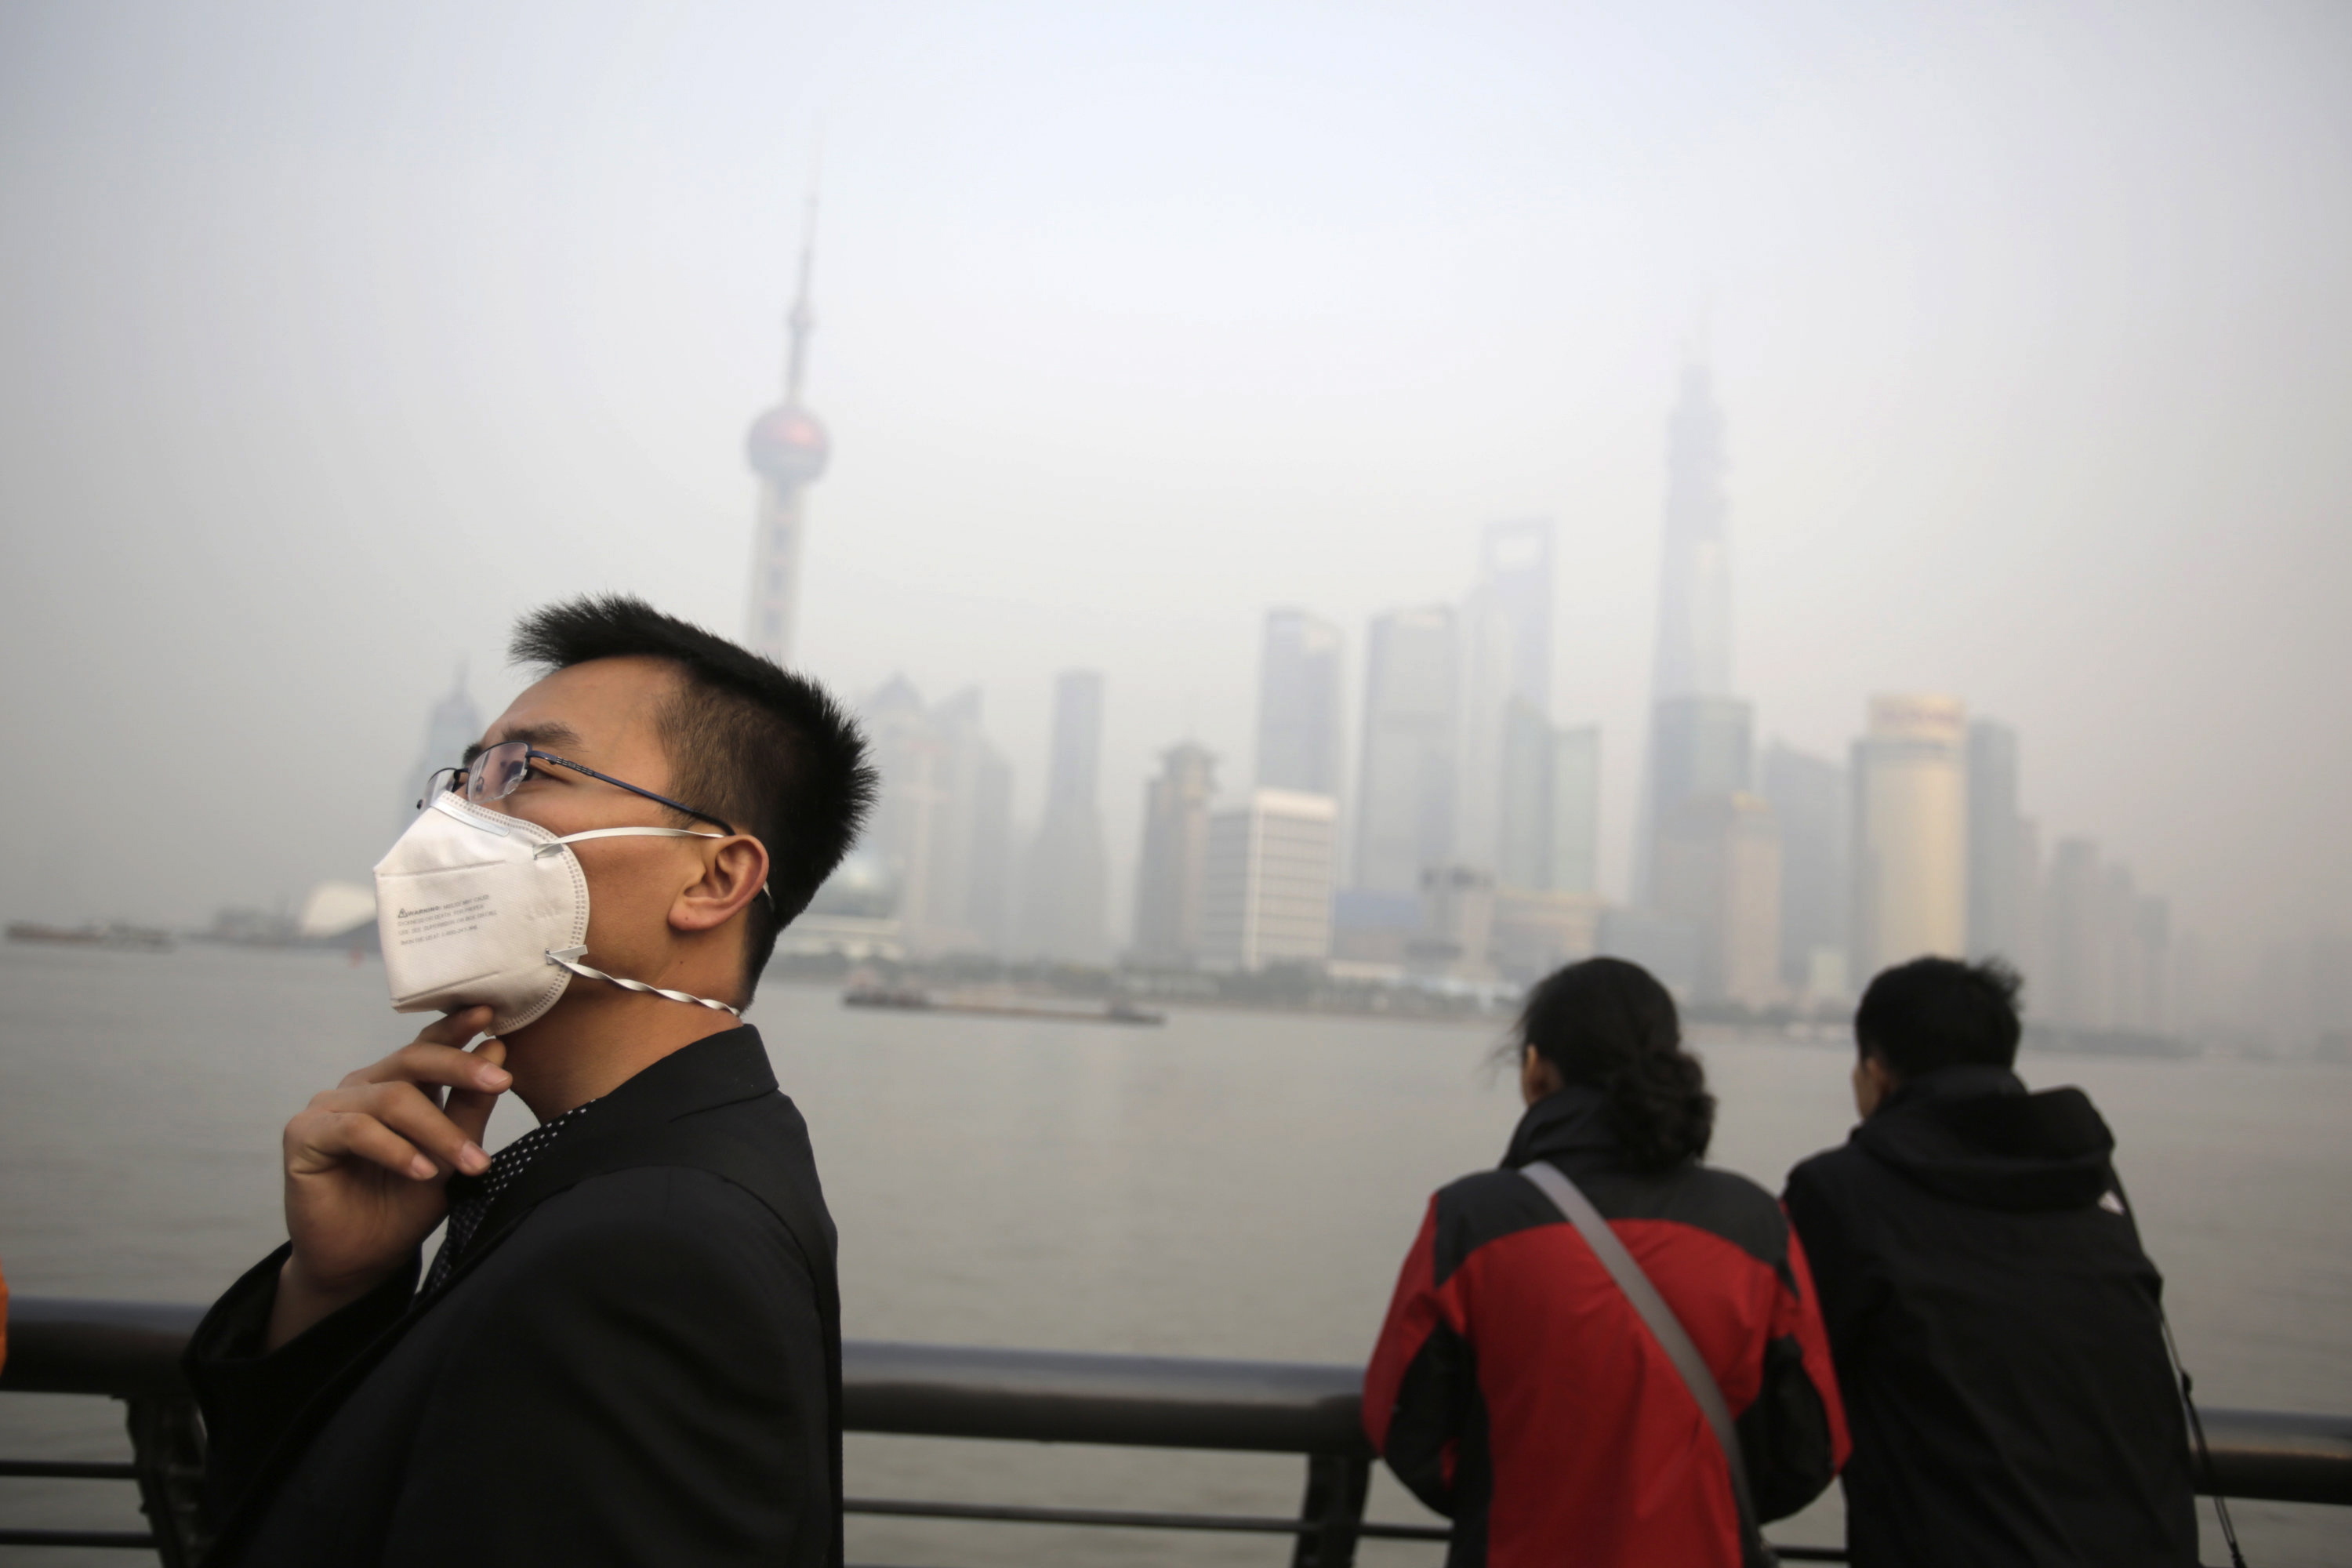 A tourist wearing a protective mask stands by as a couple look across the Huangpu River, shrouded in heavy haze Friday at the Bund in Shanghai, China.